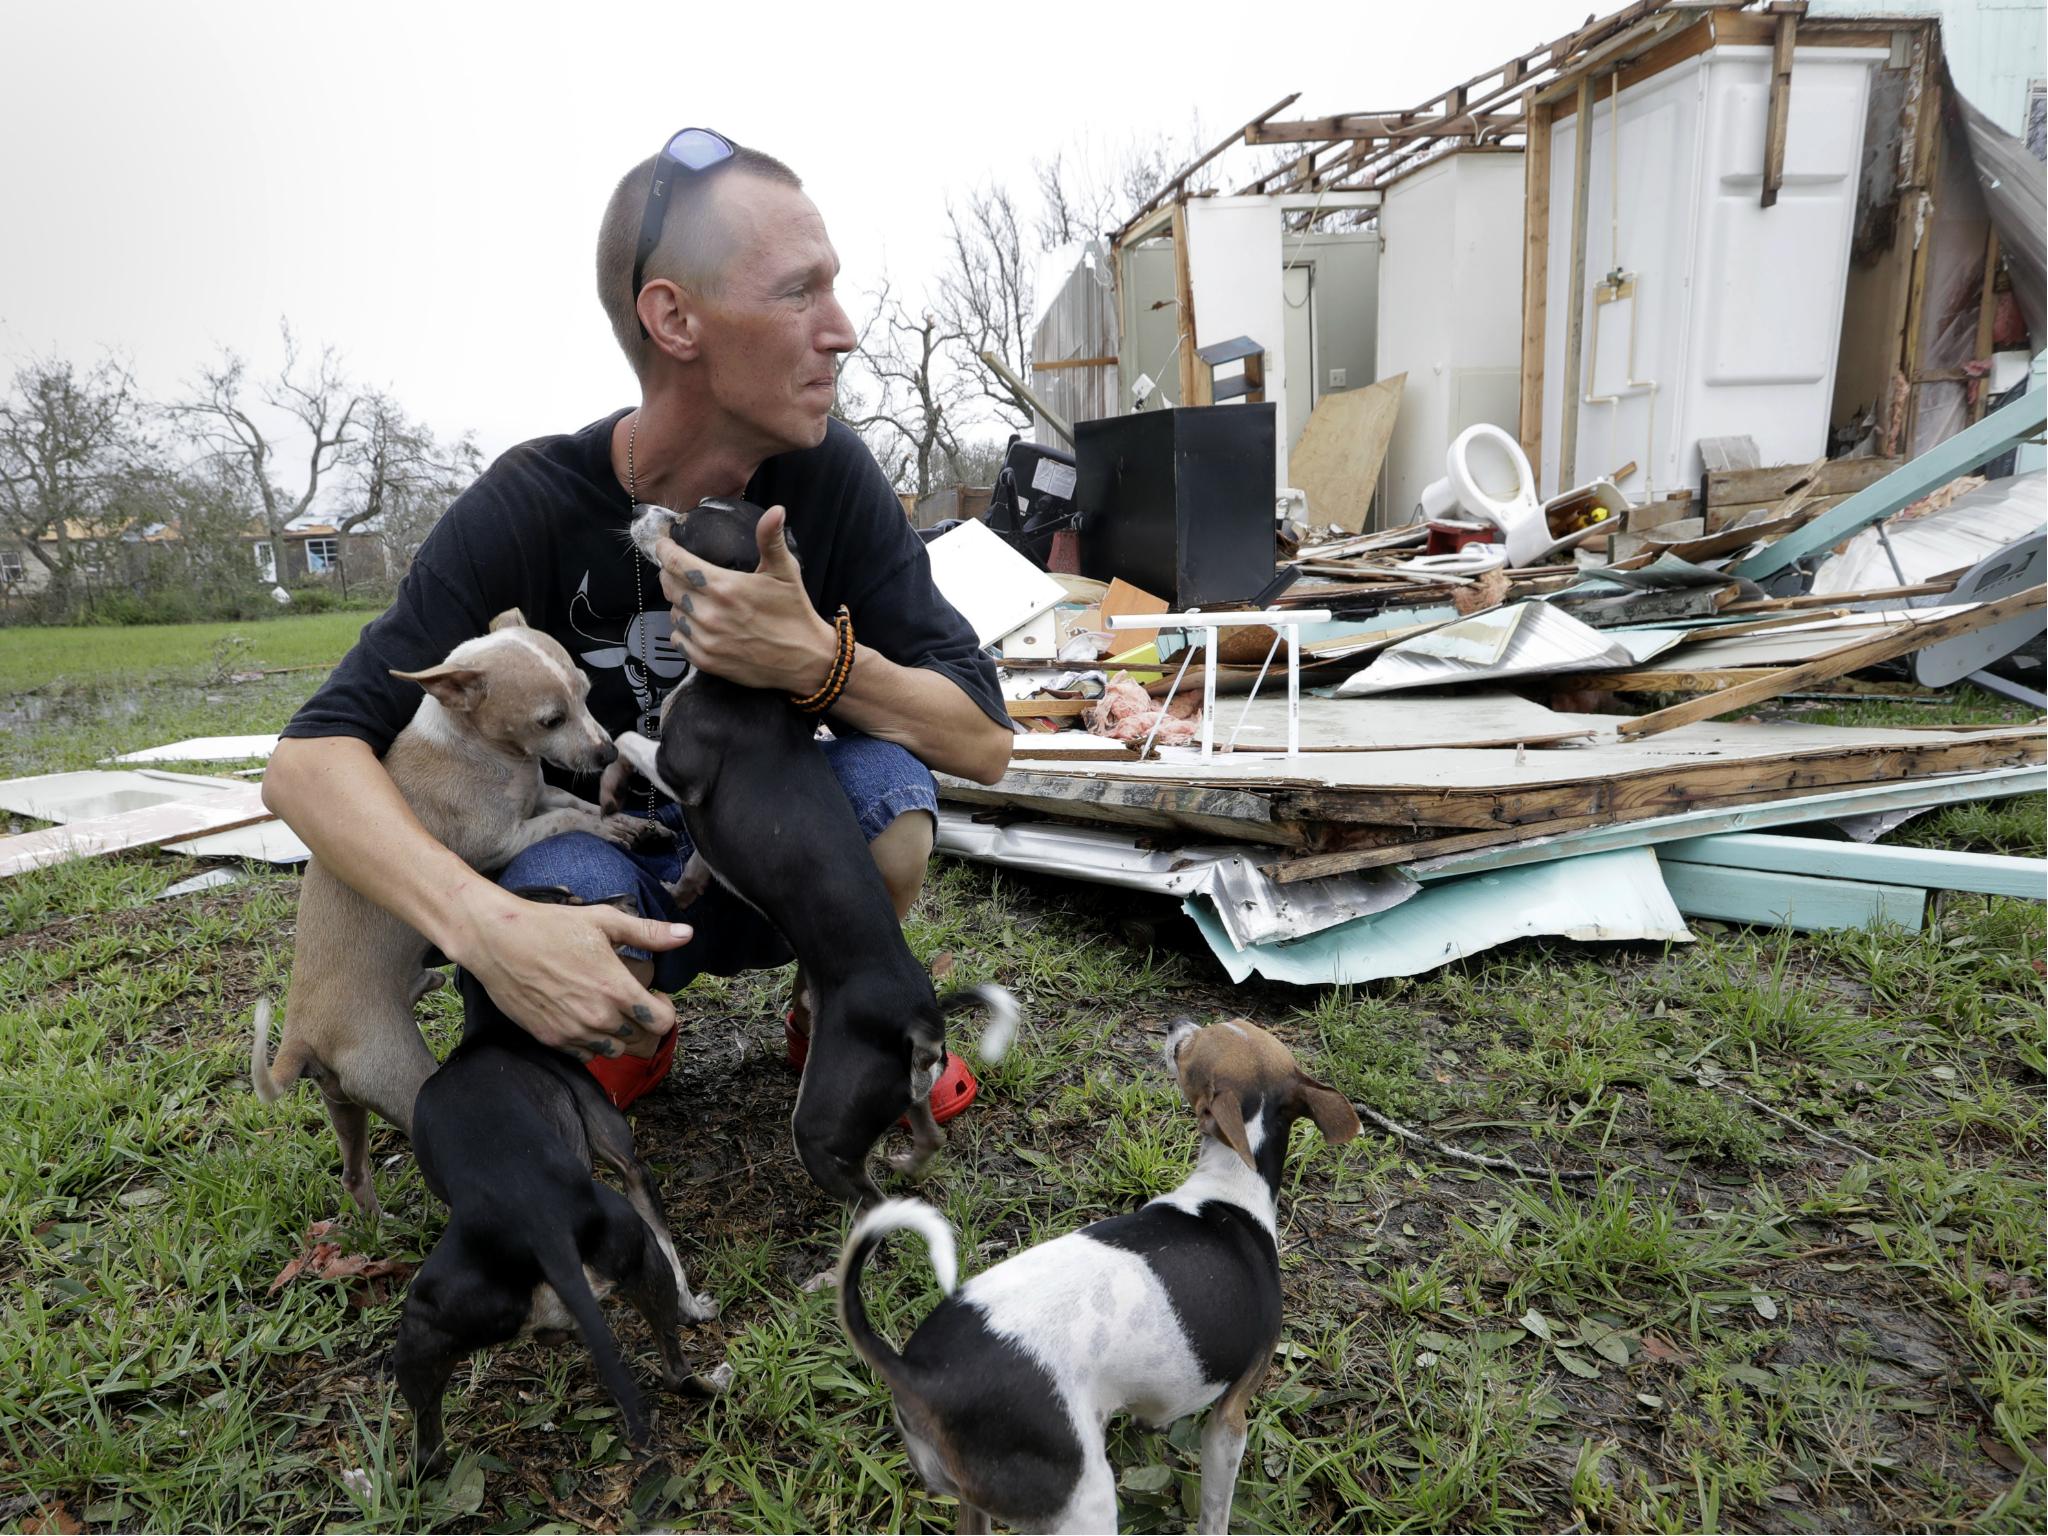 Sam Speights tries to hold back tears while holding his dogs and surveying the damage to his home in the wake of Hurricane Harvey 27 August in Rockport, Texas.